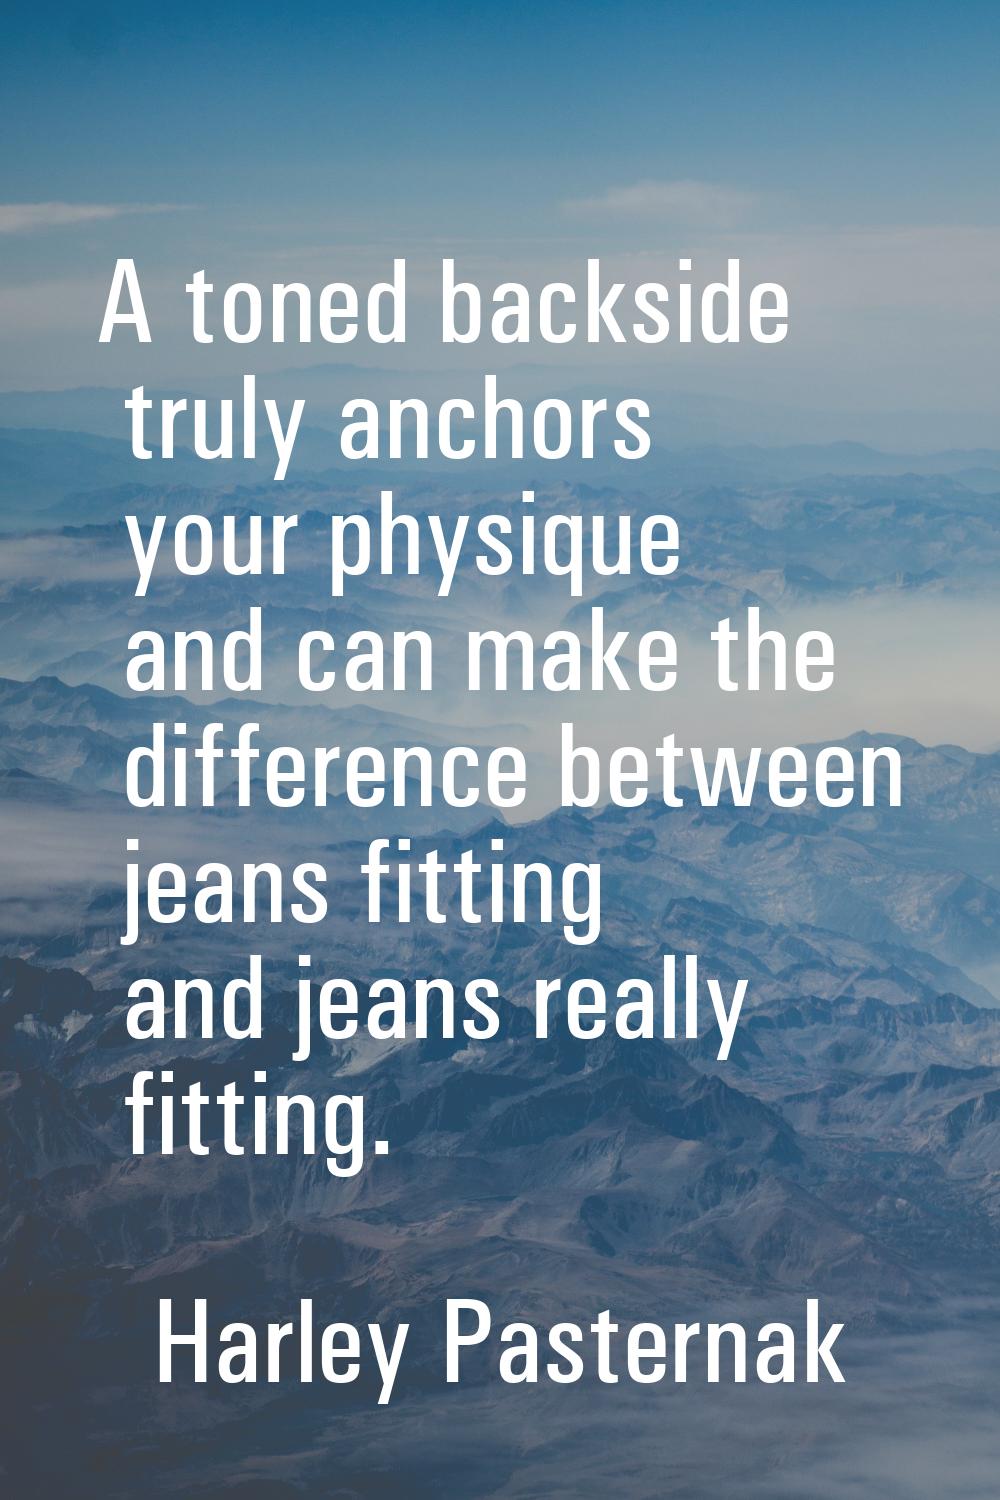 A toned backside truly anchors your physique and can make the difference between jeans fitting and 